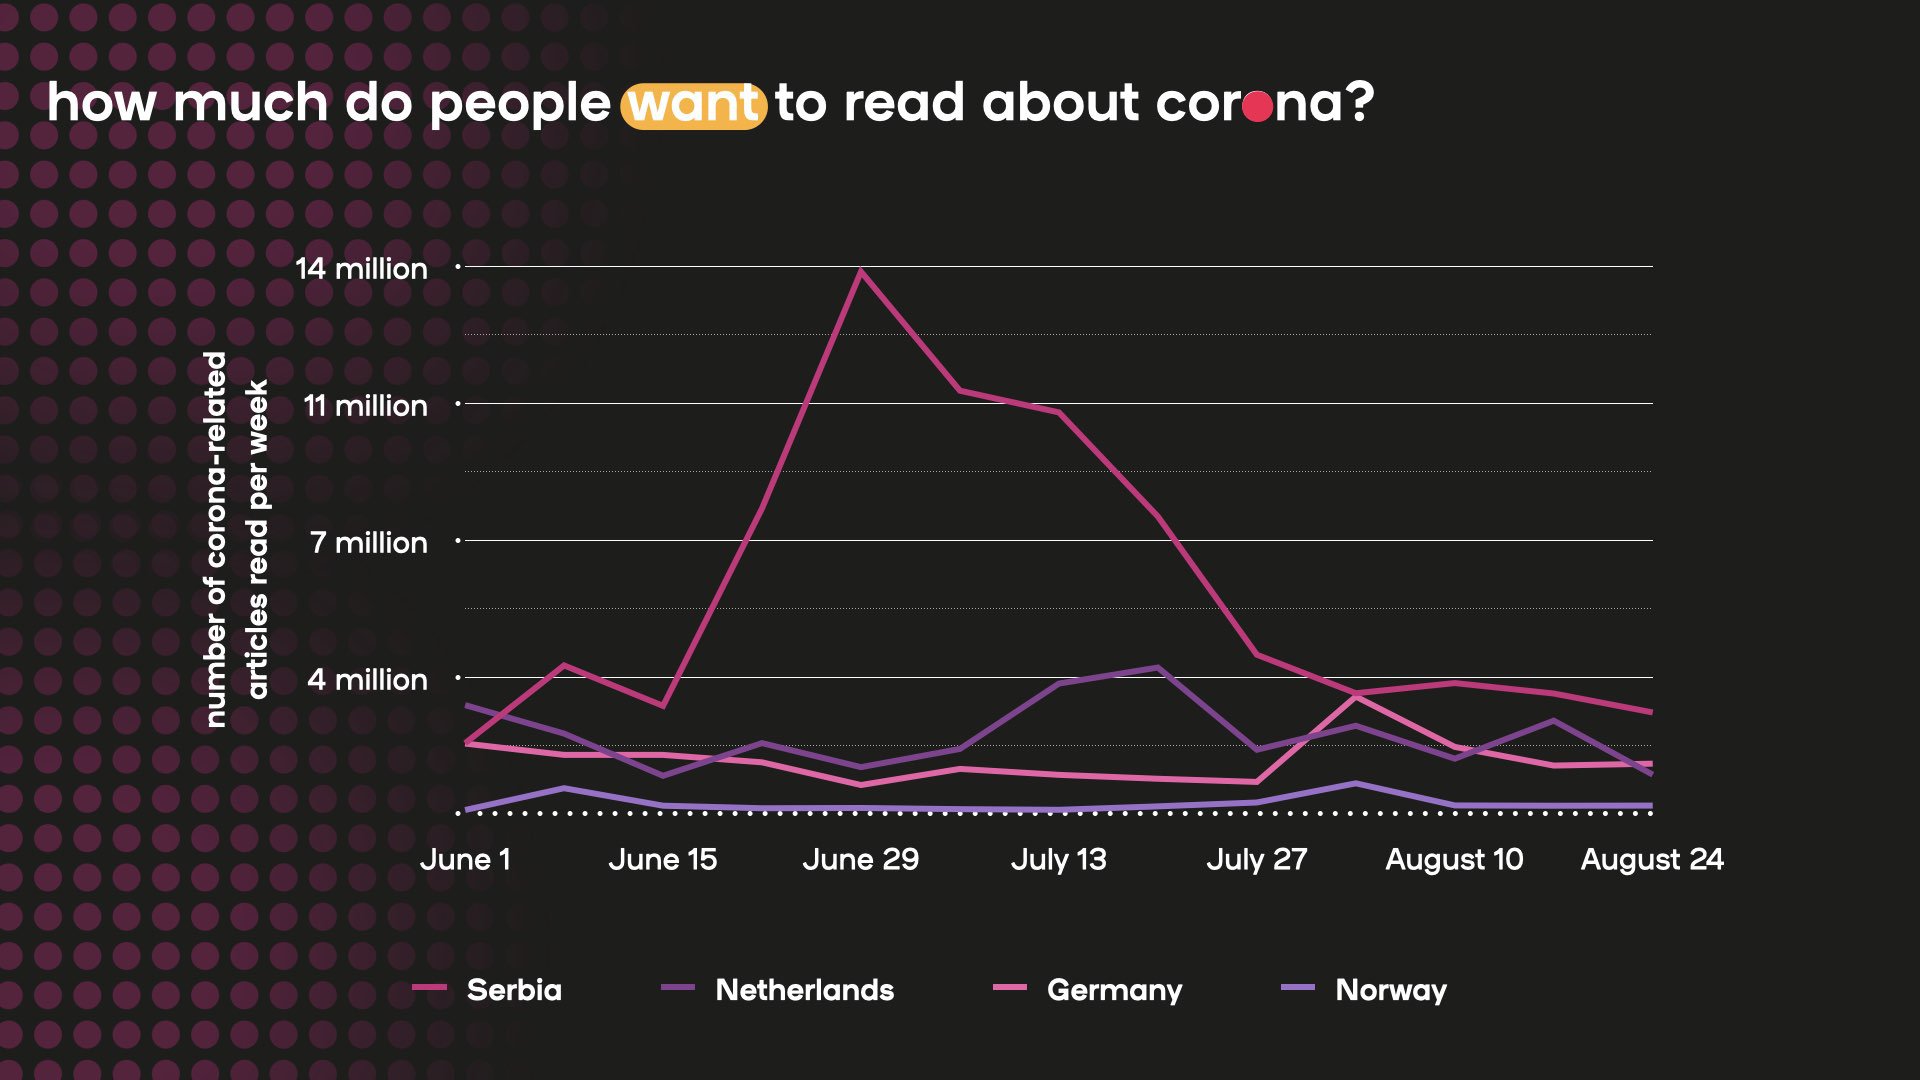 Interest in corona-related articles differs greatly per country and changes along with current events